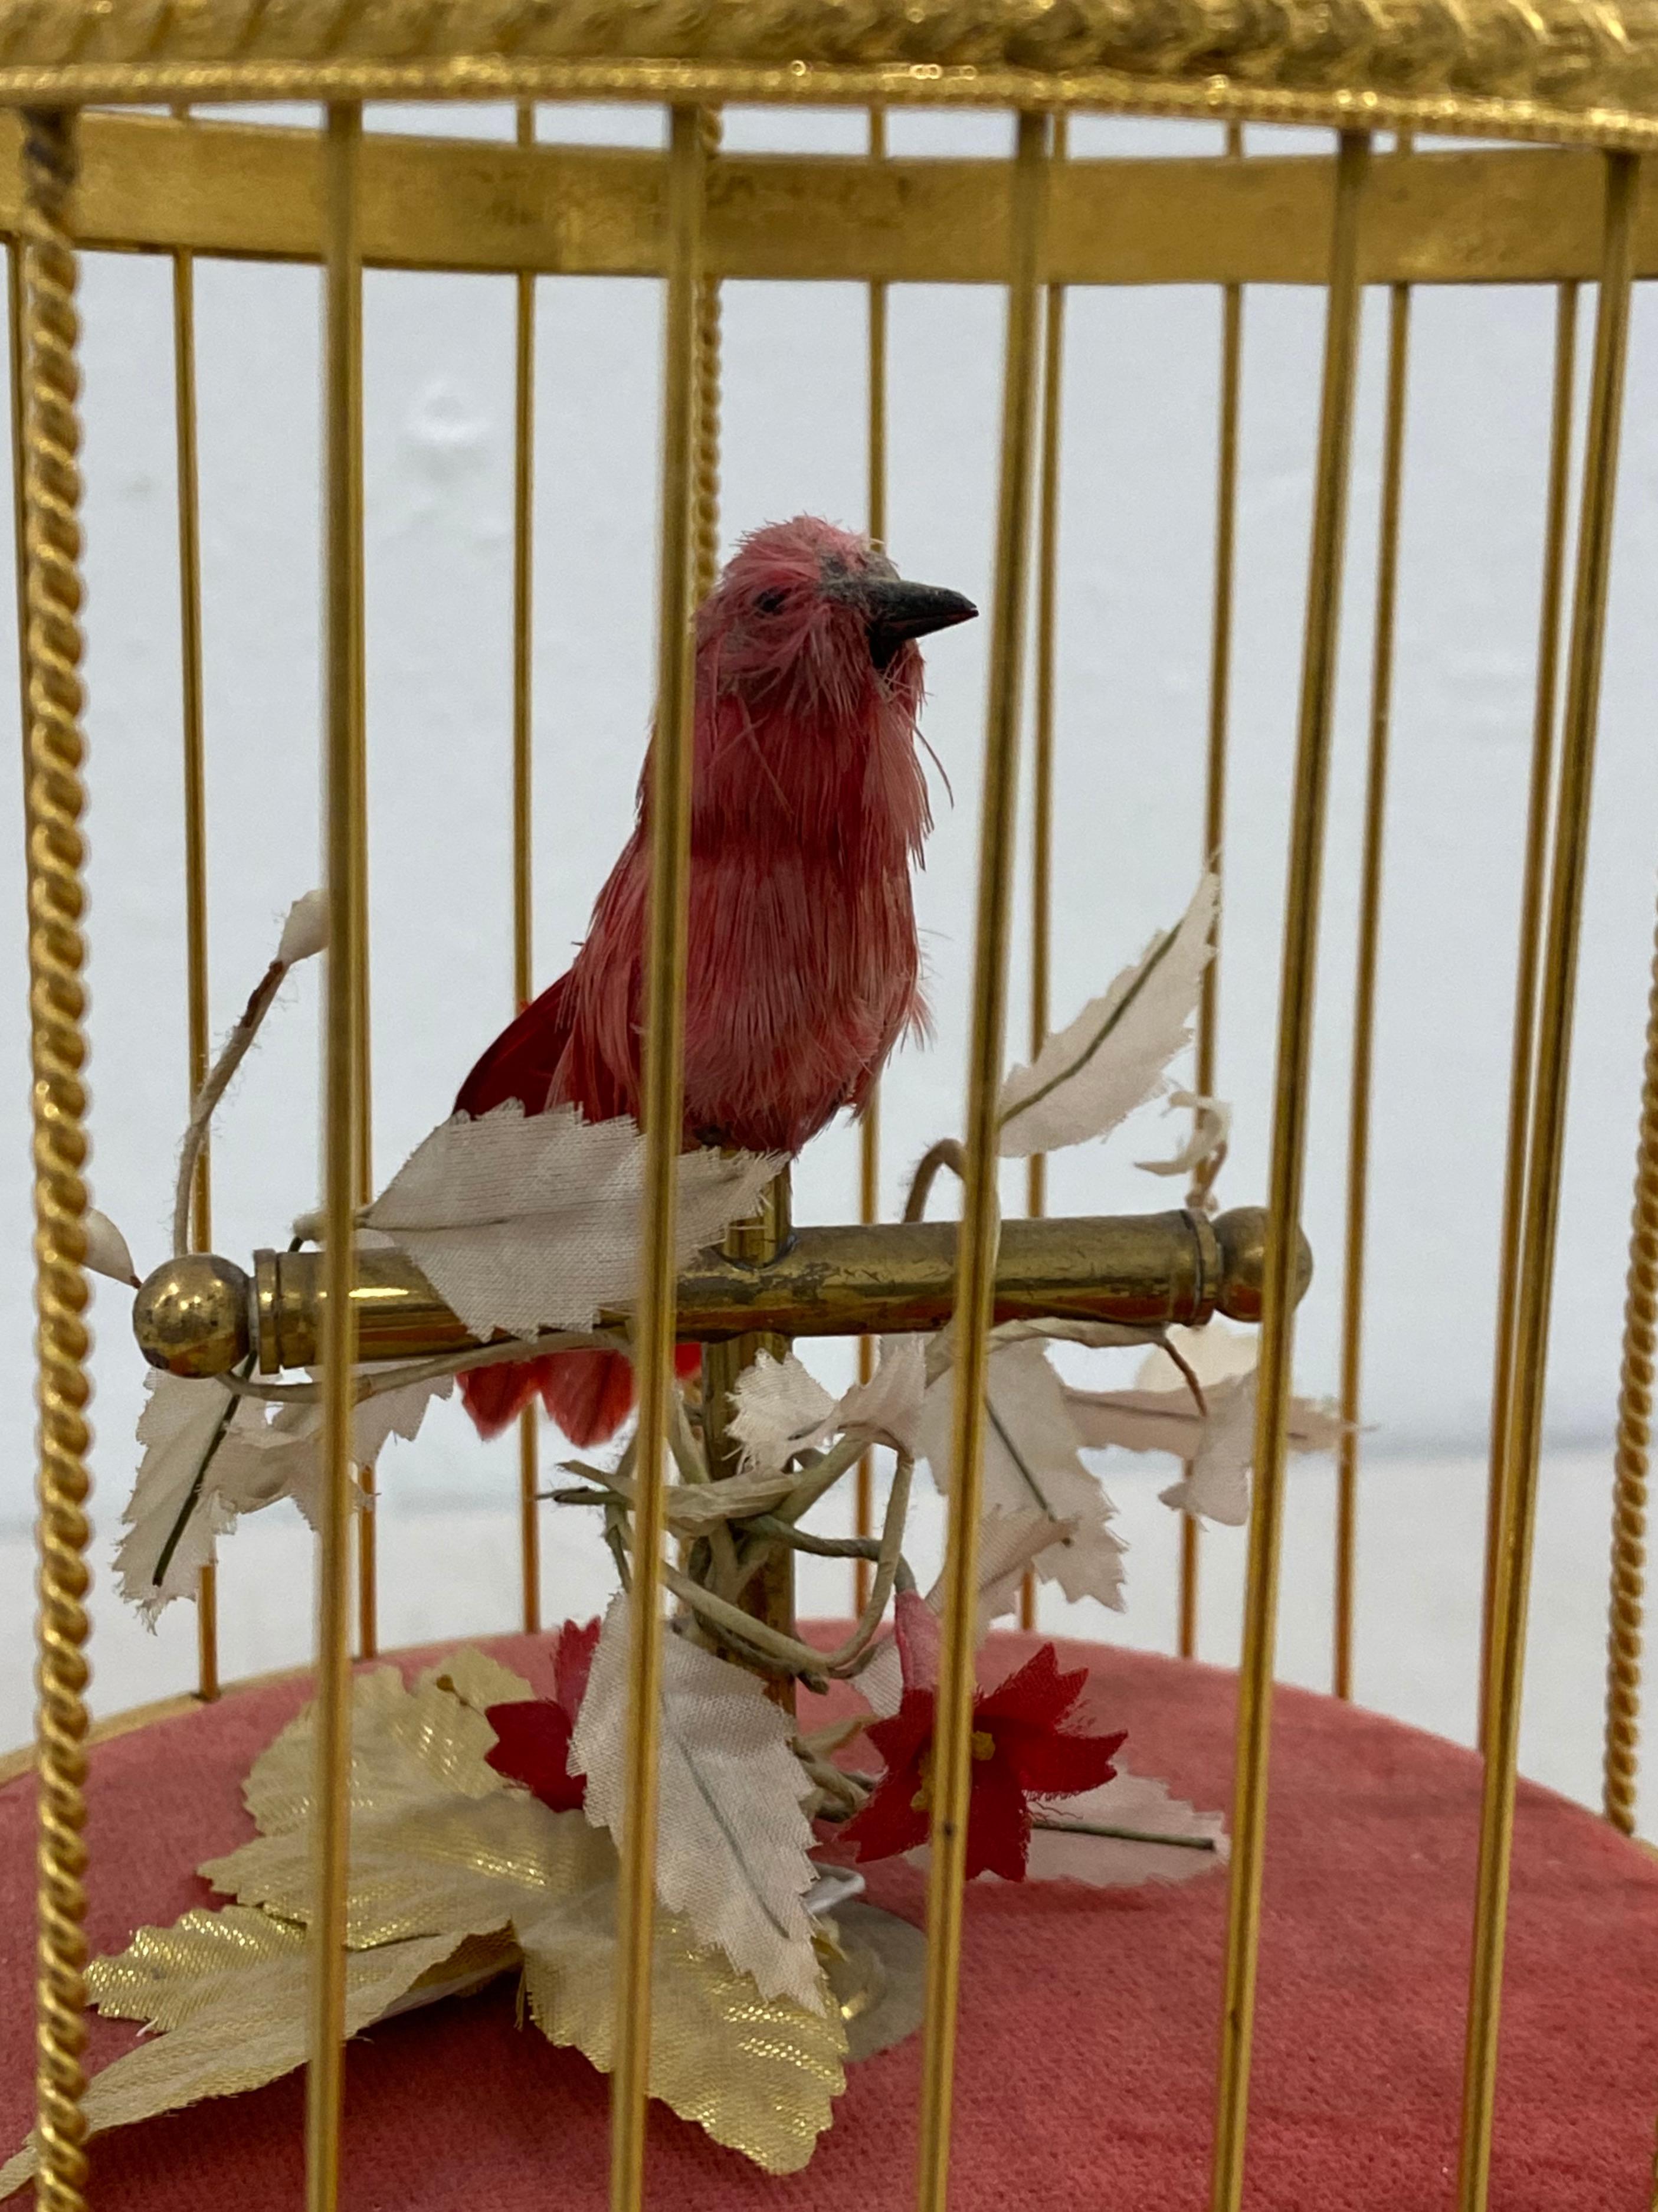 Vintage singing bird in a gilded cage automaton C.1930s

This charming little red bid sings when you wind her up

The mechanics are in working condition and the bird chirps away and her body moves a bit

The bird, plants and red fabric show